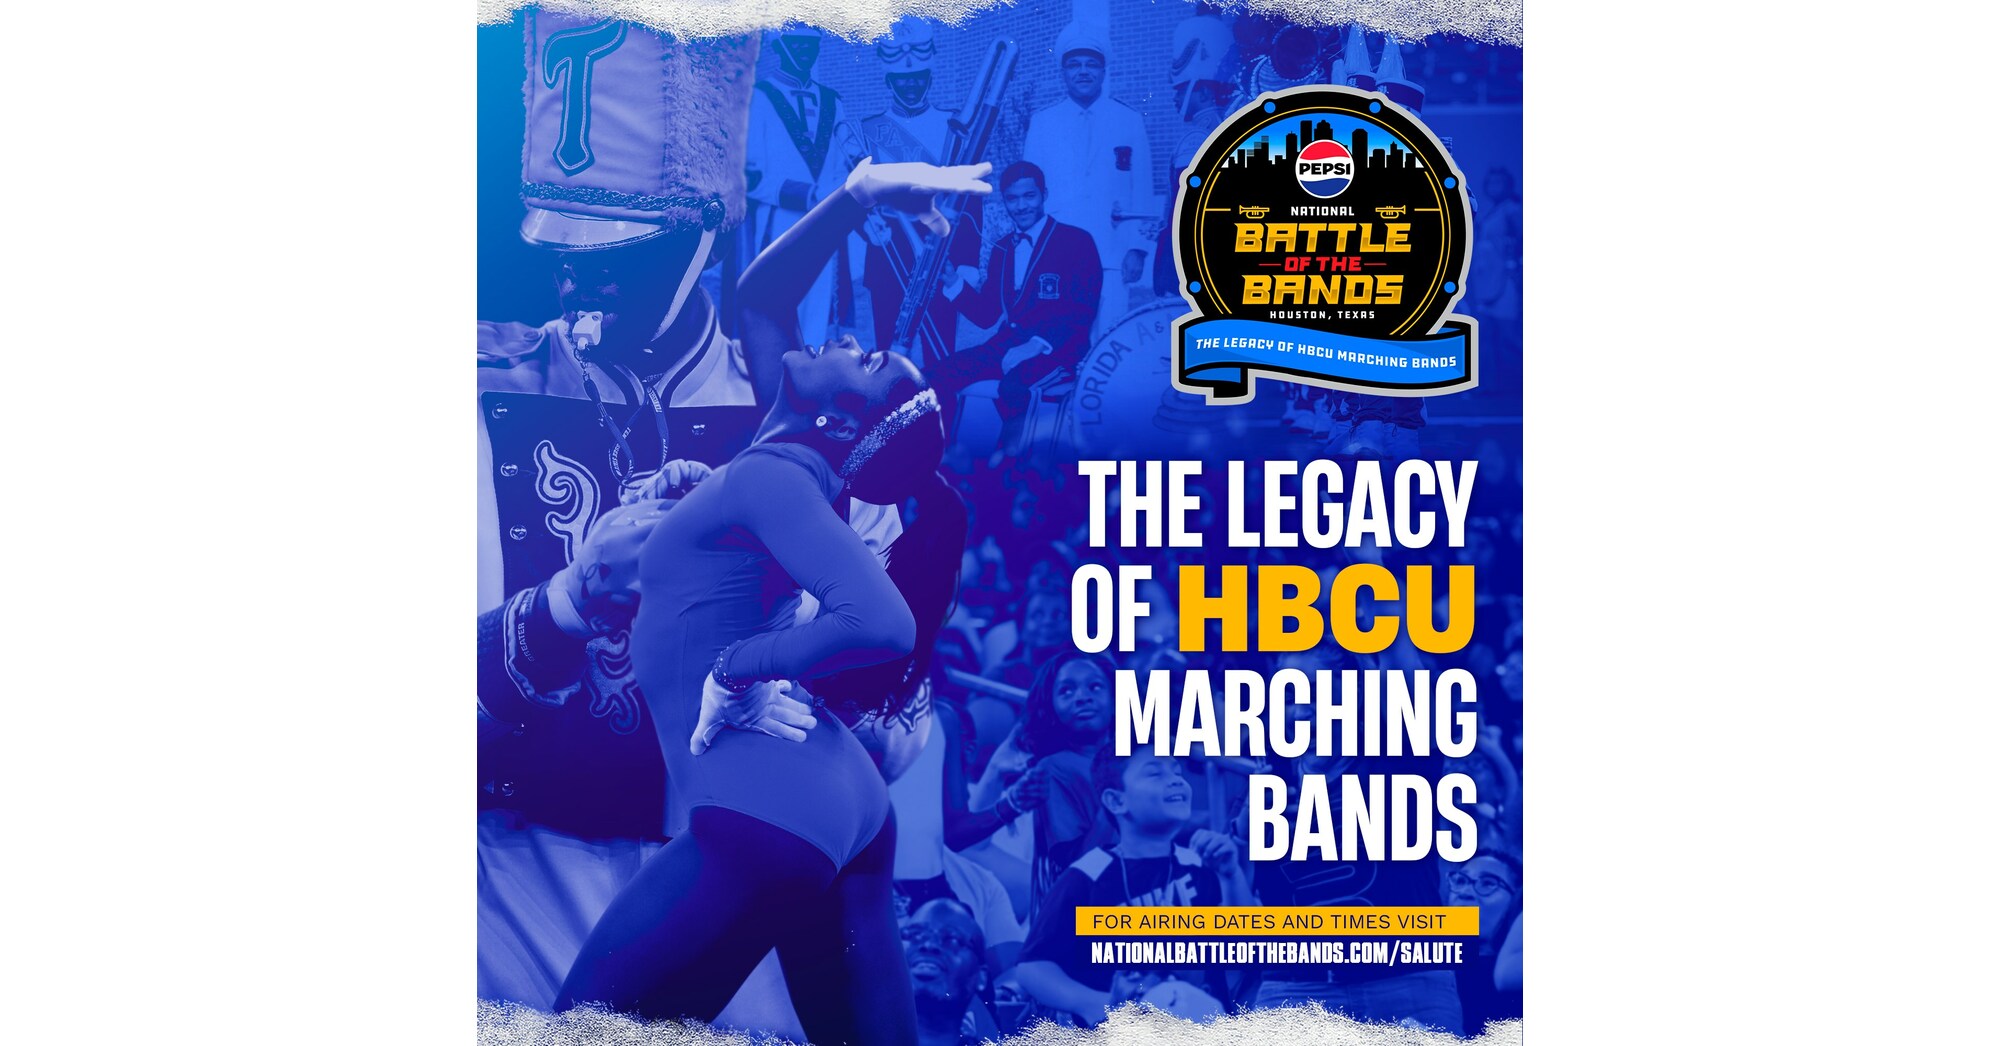 National Battle of the Bands Honors HBCU Heritage with "The Legacy of